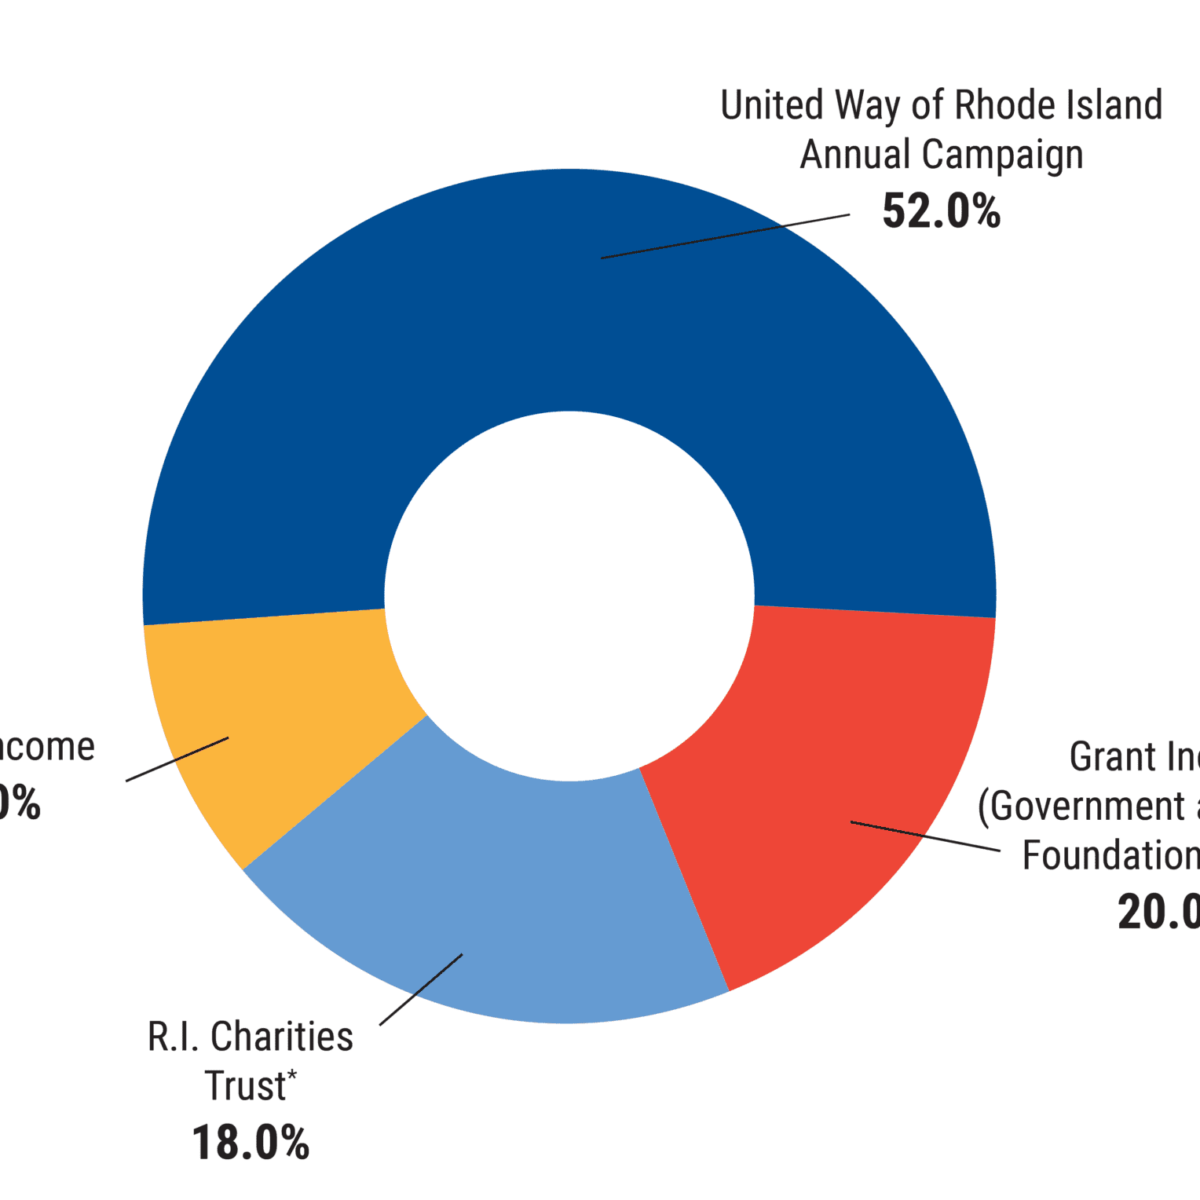 United Way of Rhode Island Annual Campaign (52%), Grant Income (Government and Private Foundation Grants) 20%, R.I. Charities Trust* 18%, Other income 10%